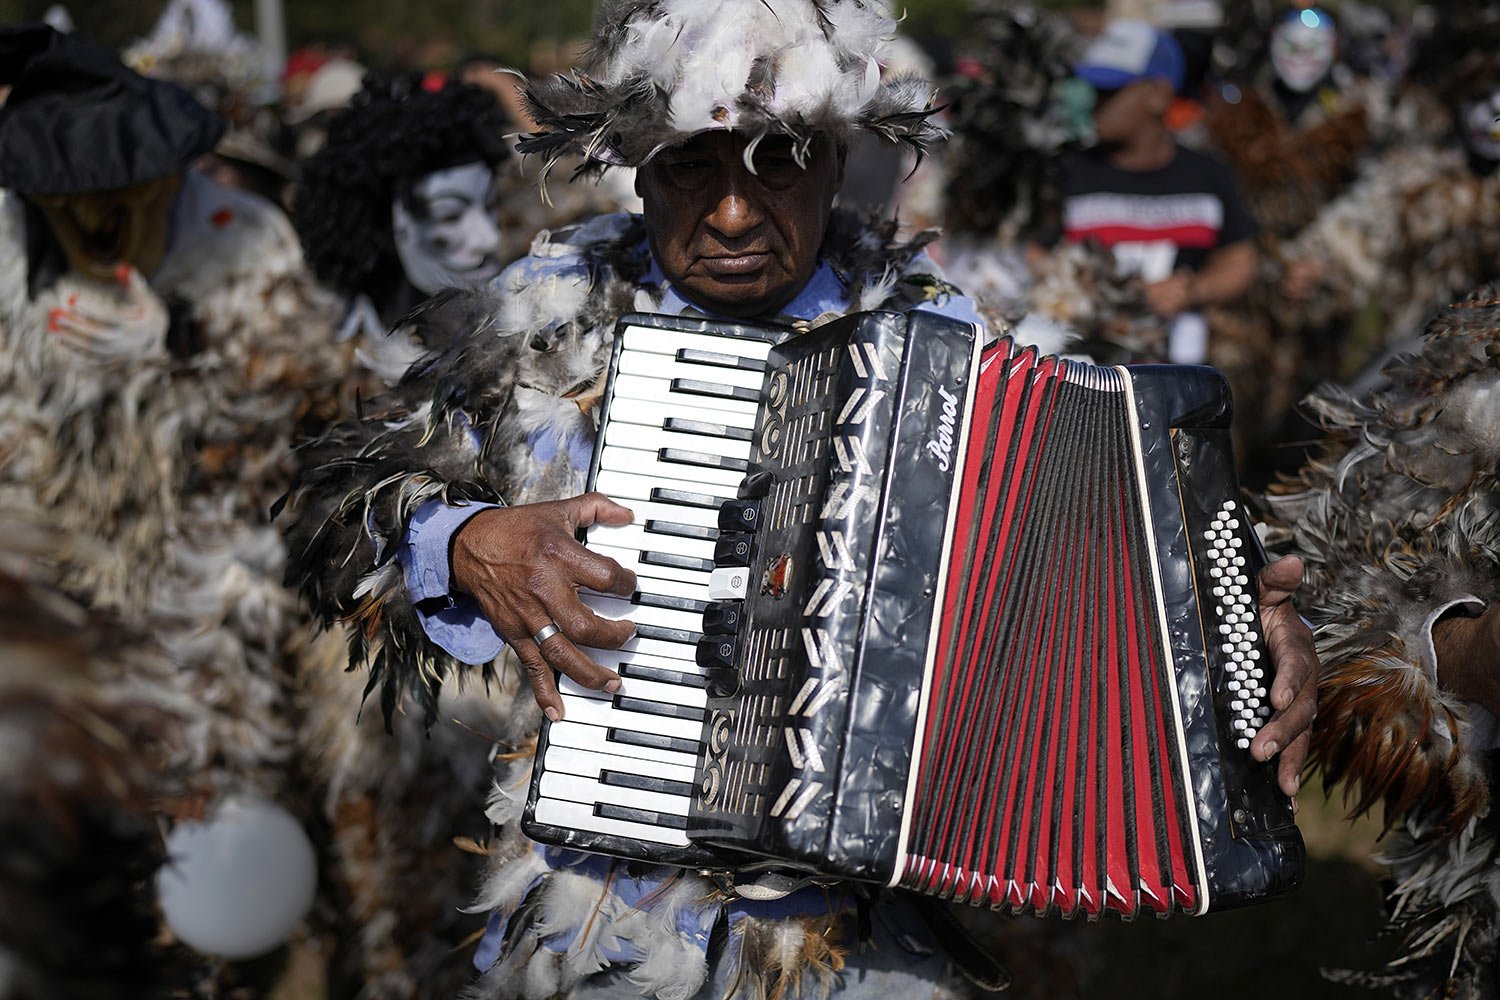  A devotee dressed in a feathered costume and playing an accordion pays tribute to Saint Francisco Solano for a fulfilled request, during a procession in the saint’s honor, in Emboscada, Paraguay, July 24, 2023. (AP Photo/Jorge Saenz) 